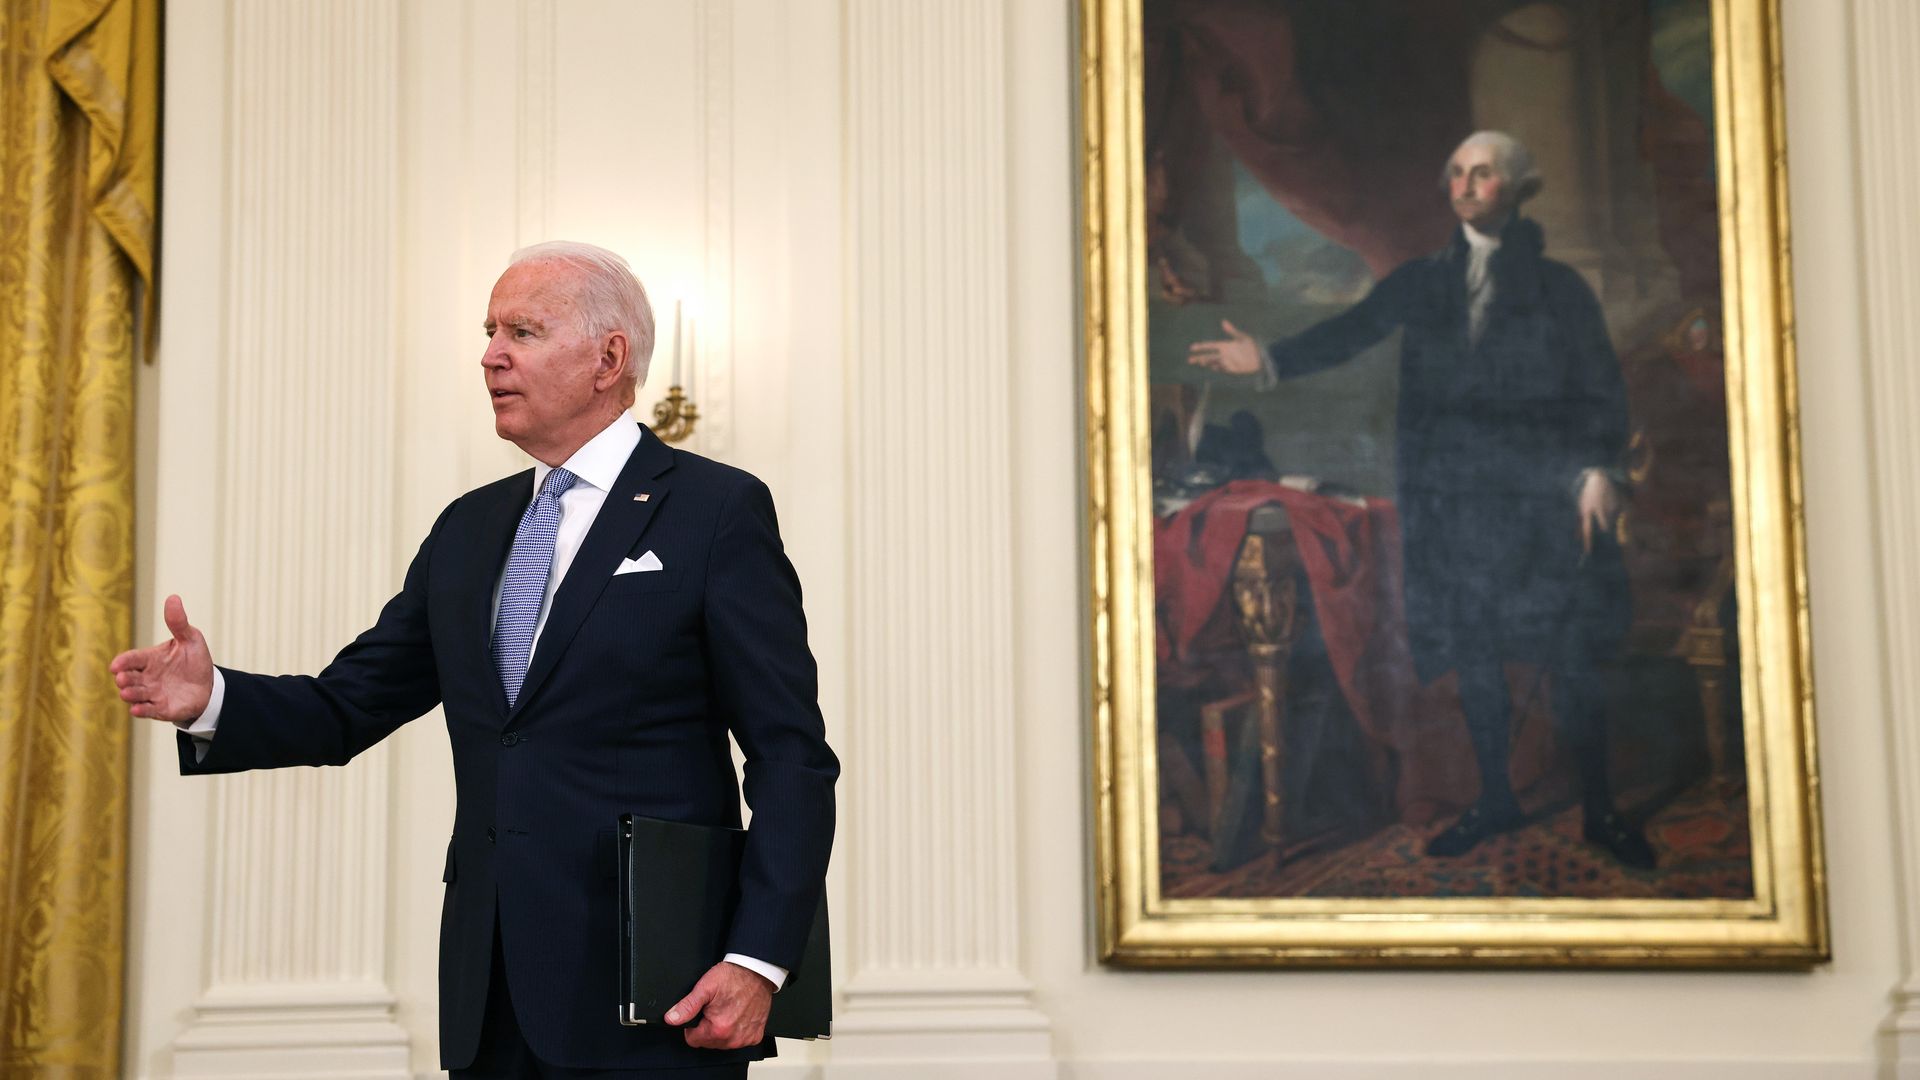 President Biden is seen mimicking the pose in a nearby portrait of George Washington.